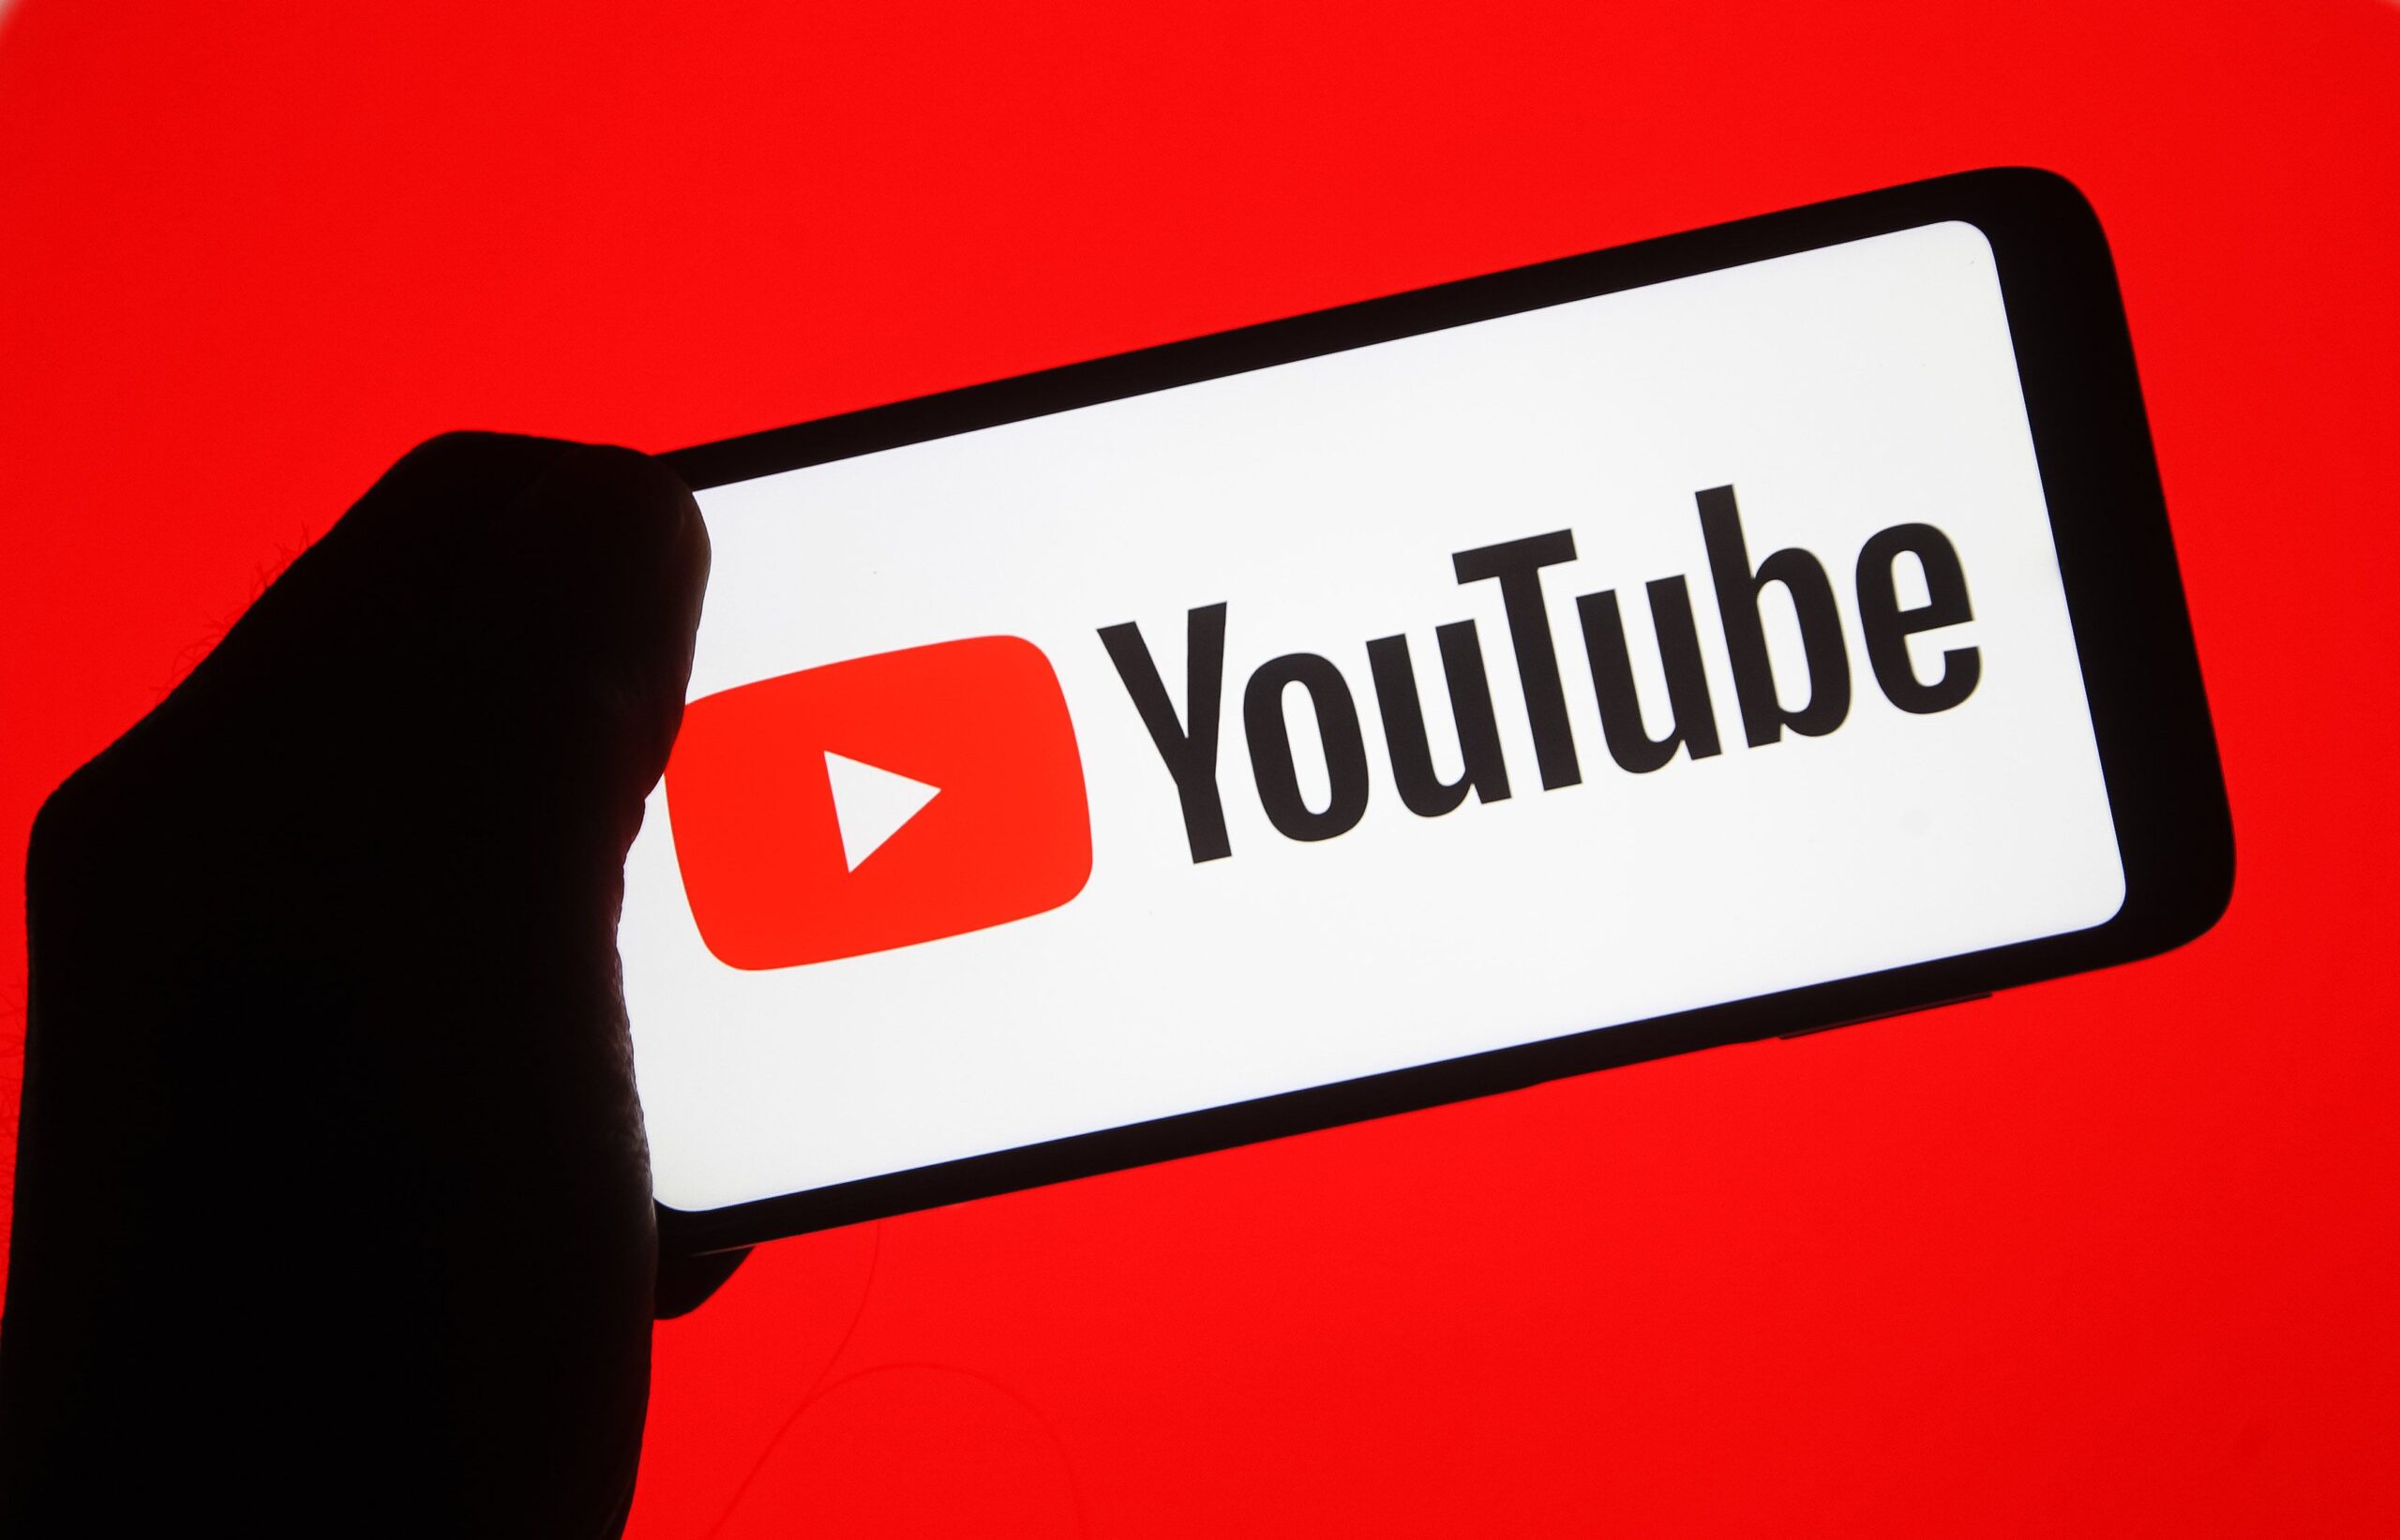 youtube announces new applause feature that allows users to jwkv scaled